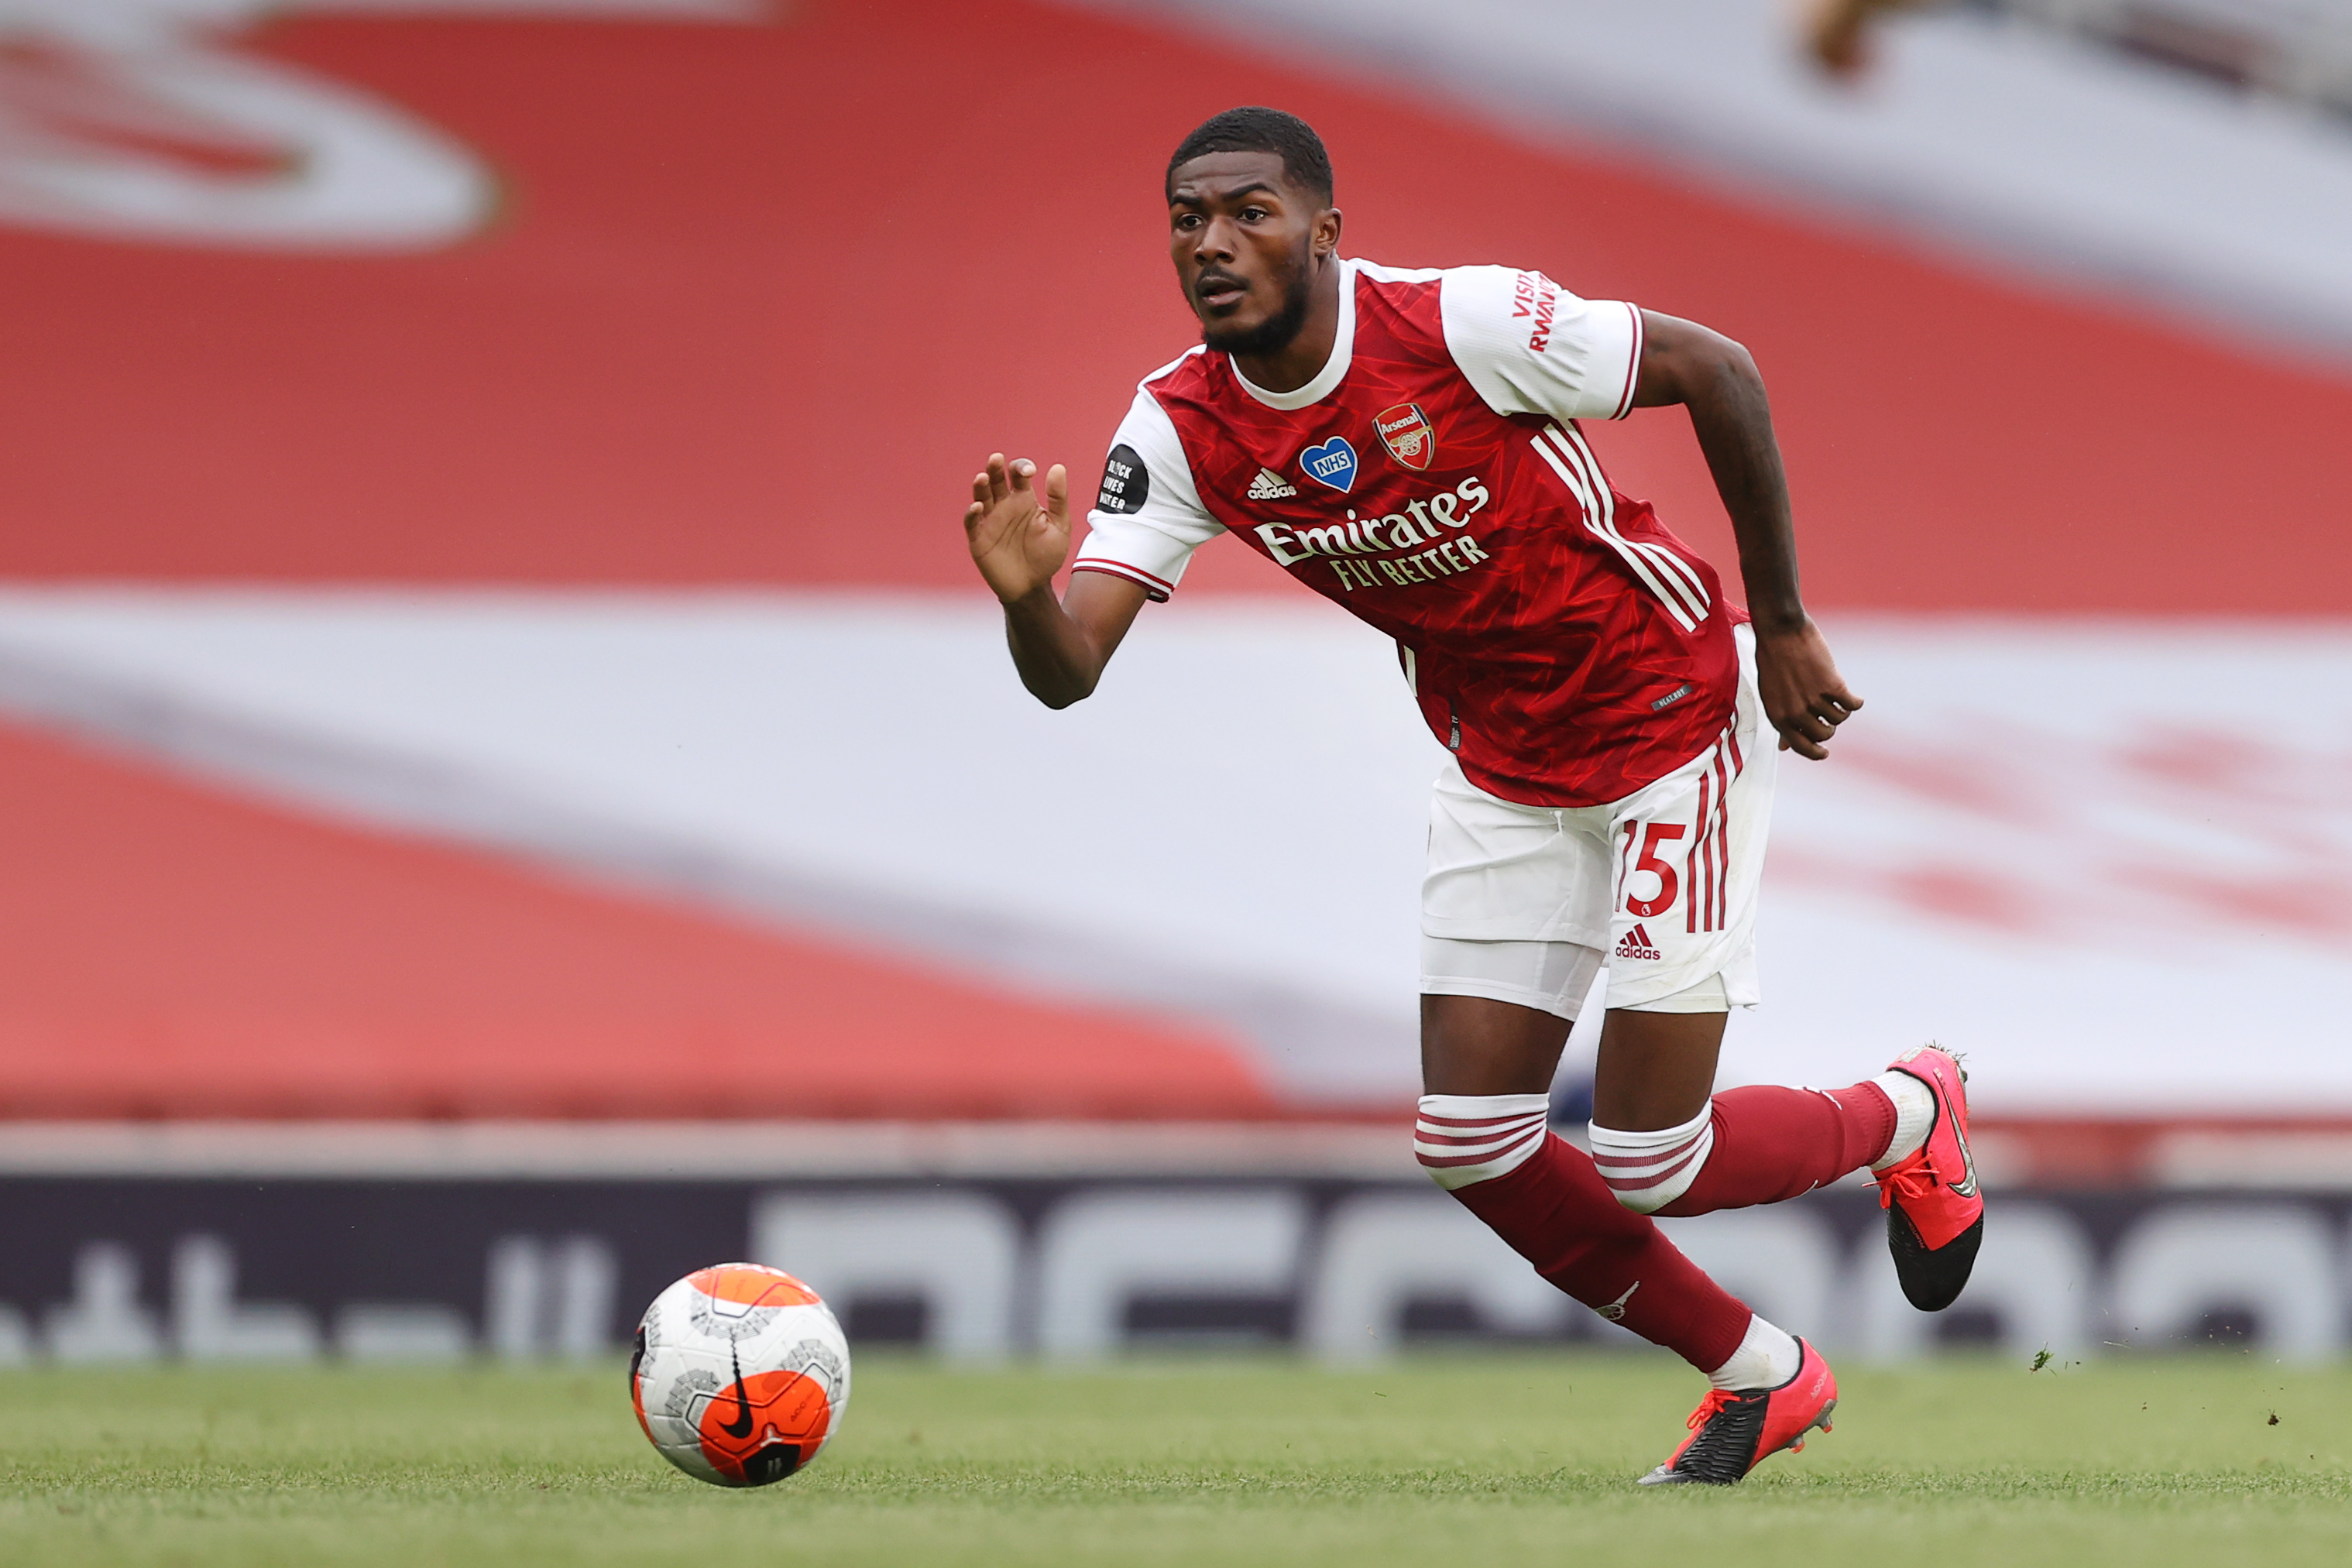 Maitland-Niles determined to lift record-breaking FA Cup